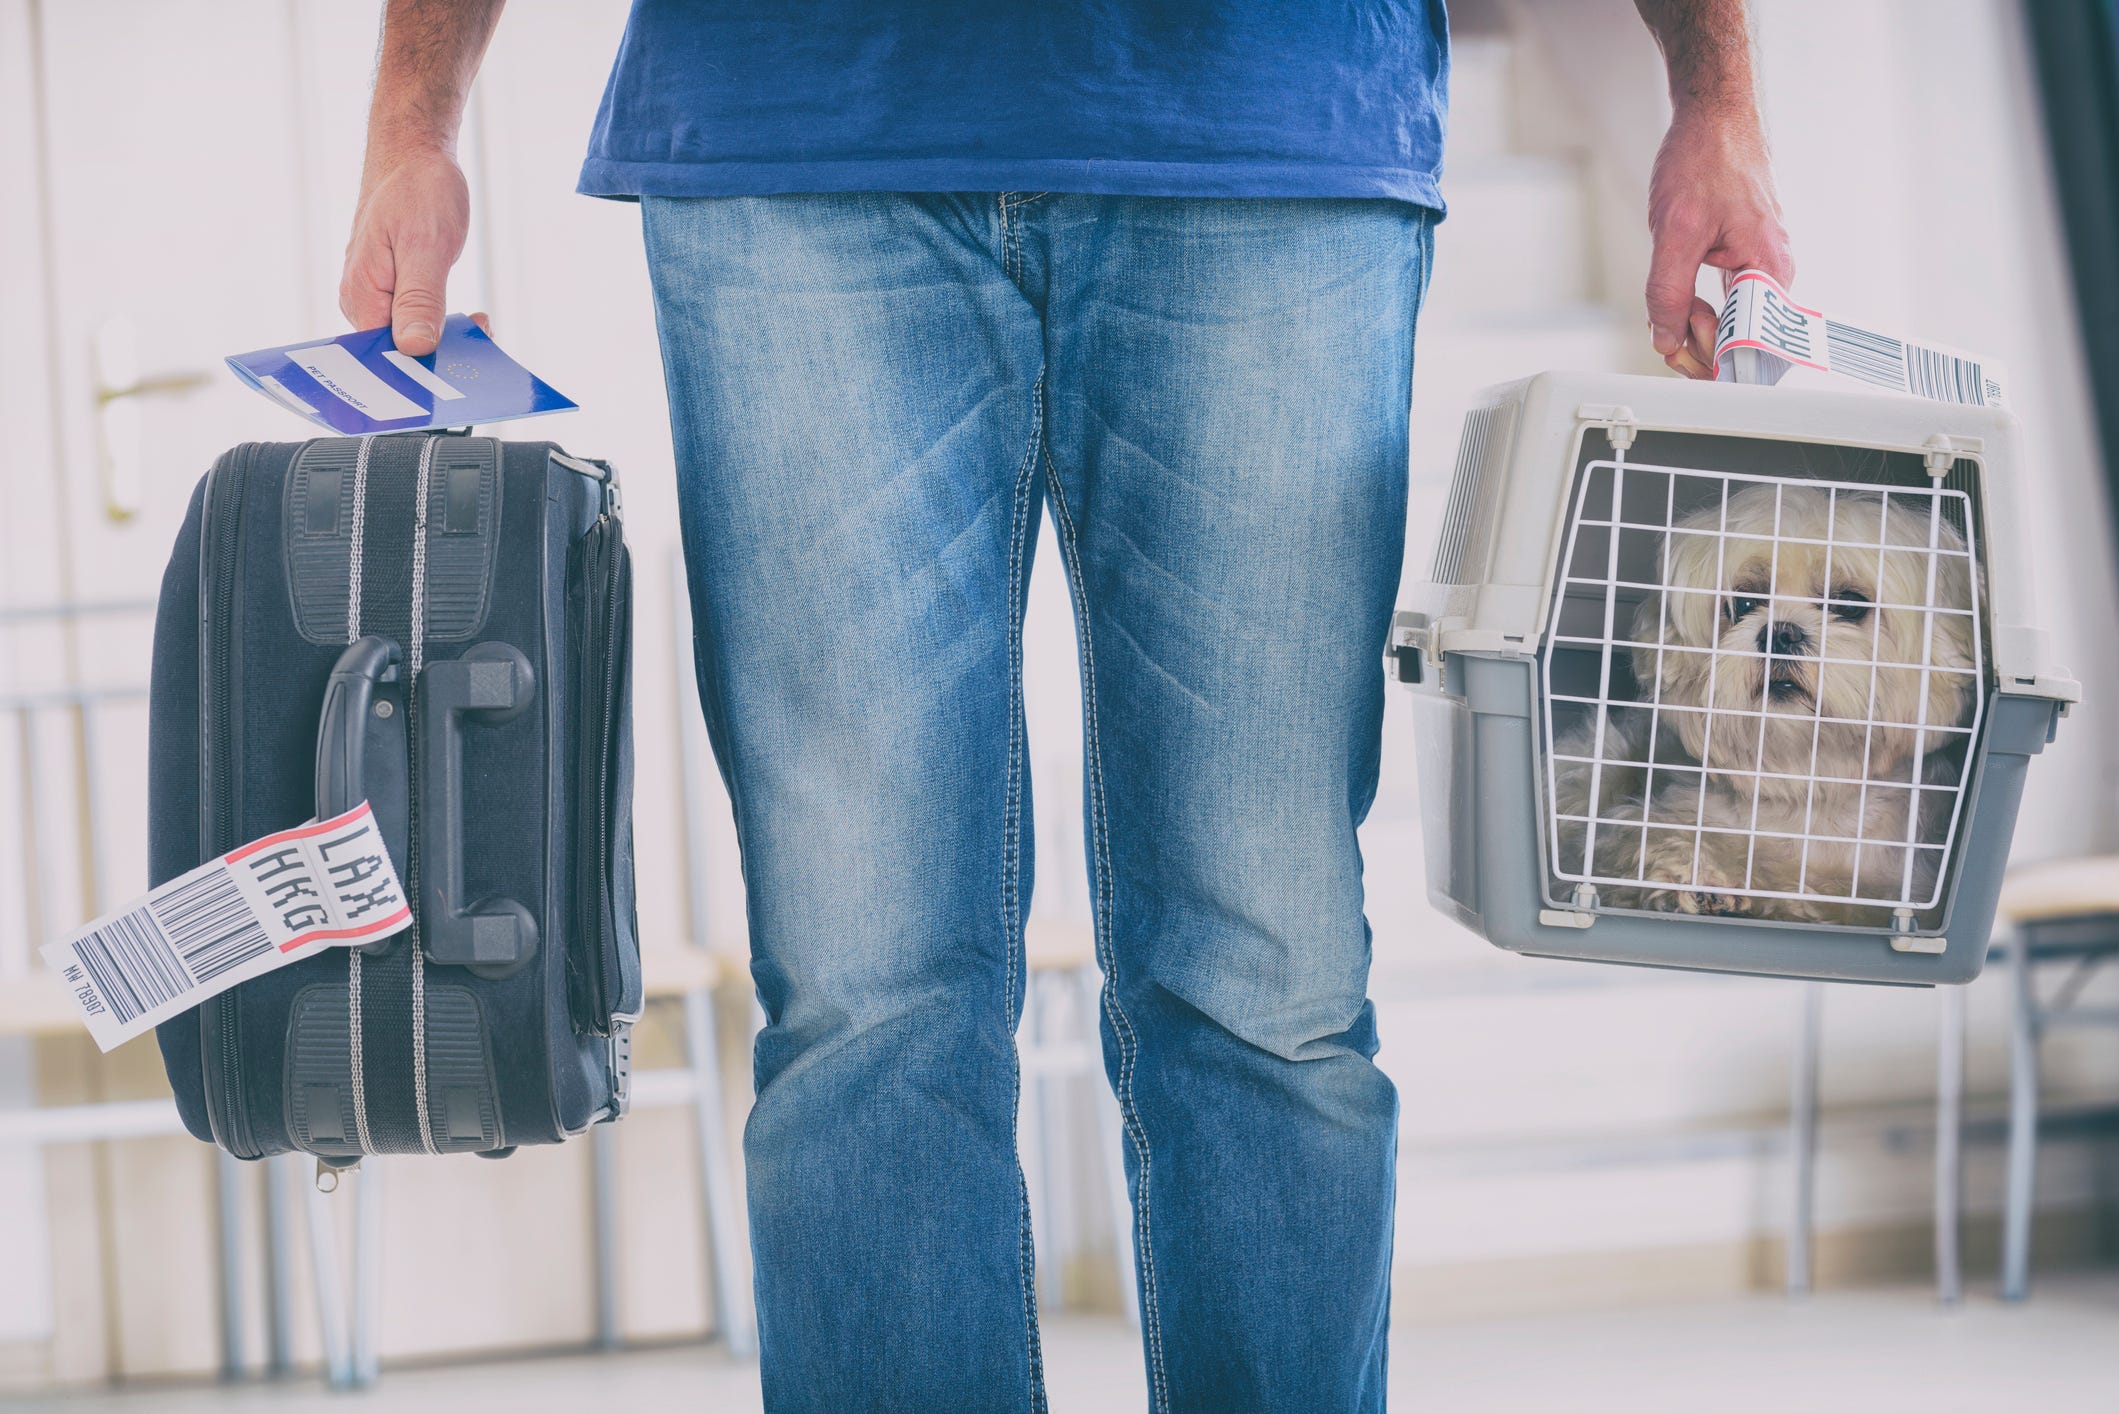 how much does it cost to fly a dog on delta airlines